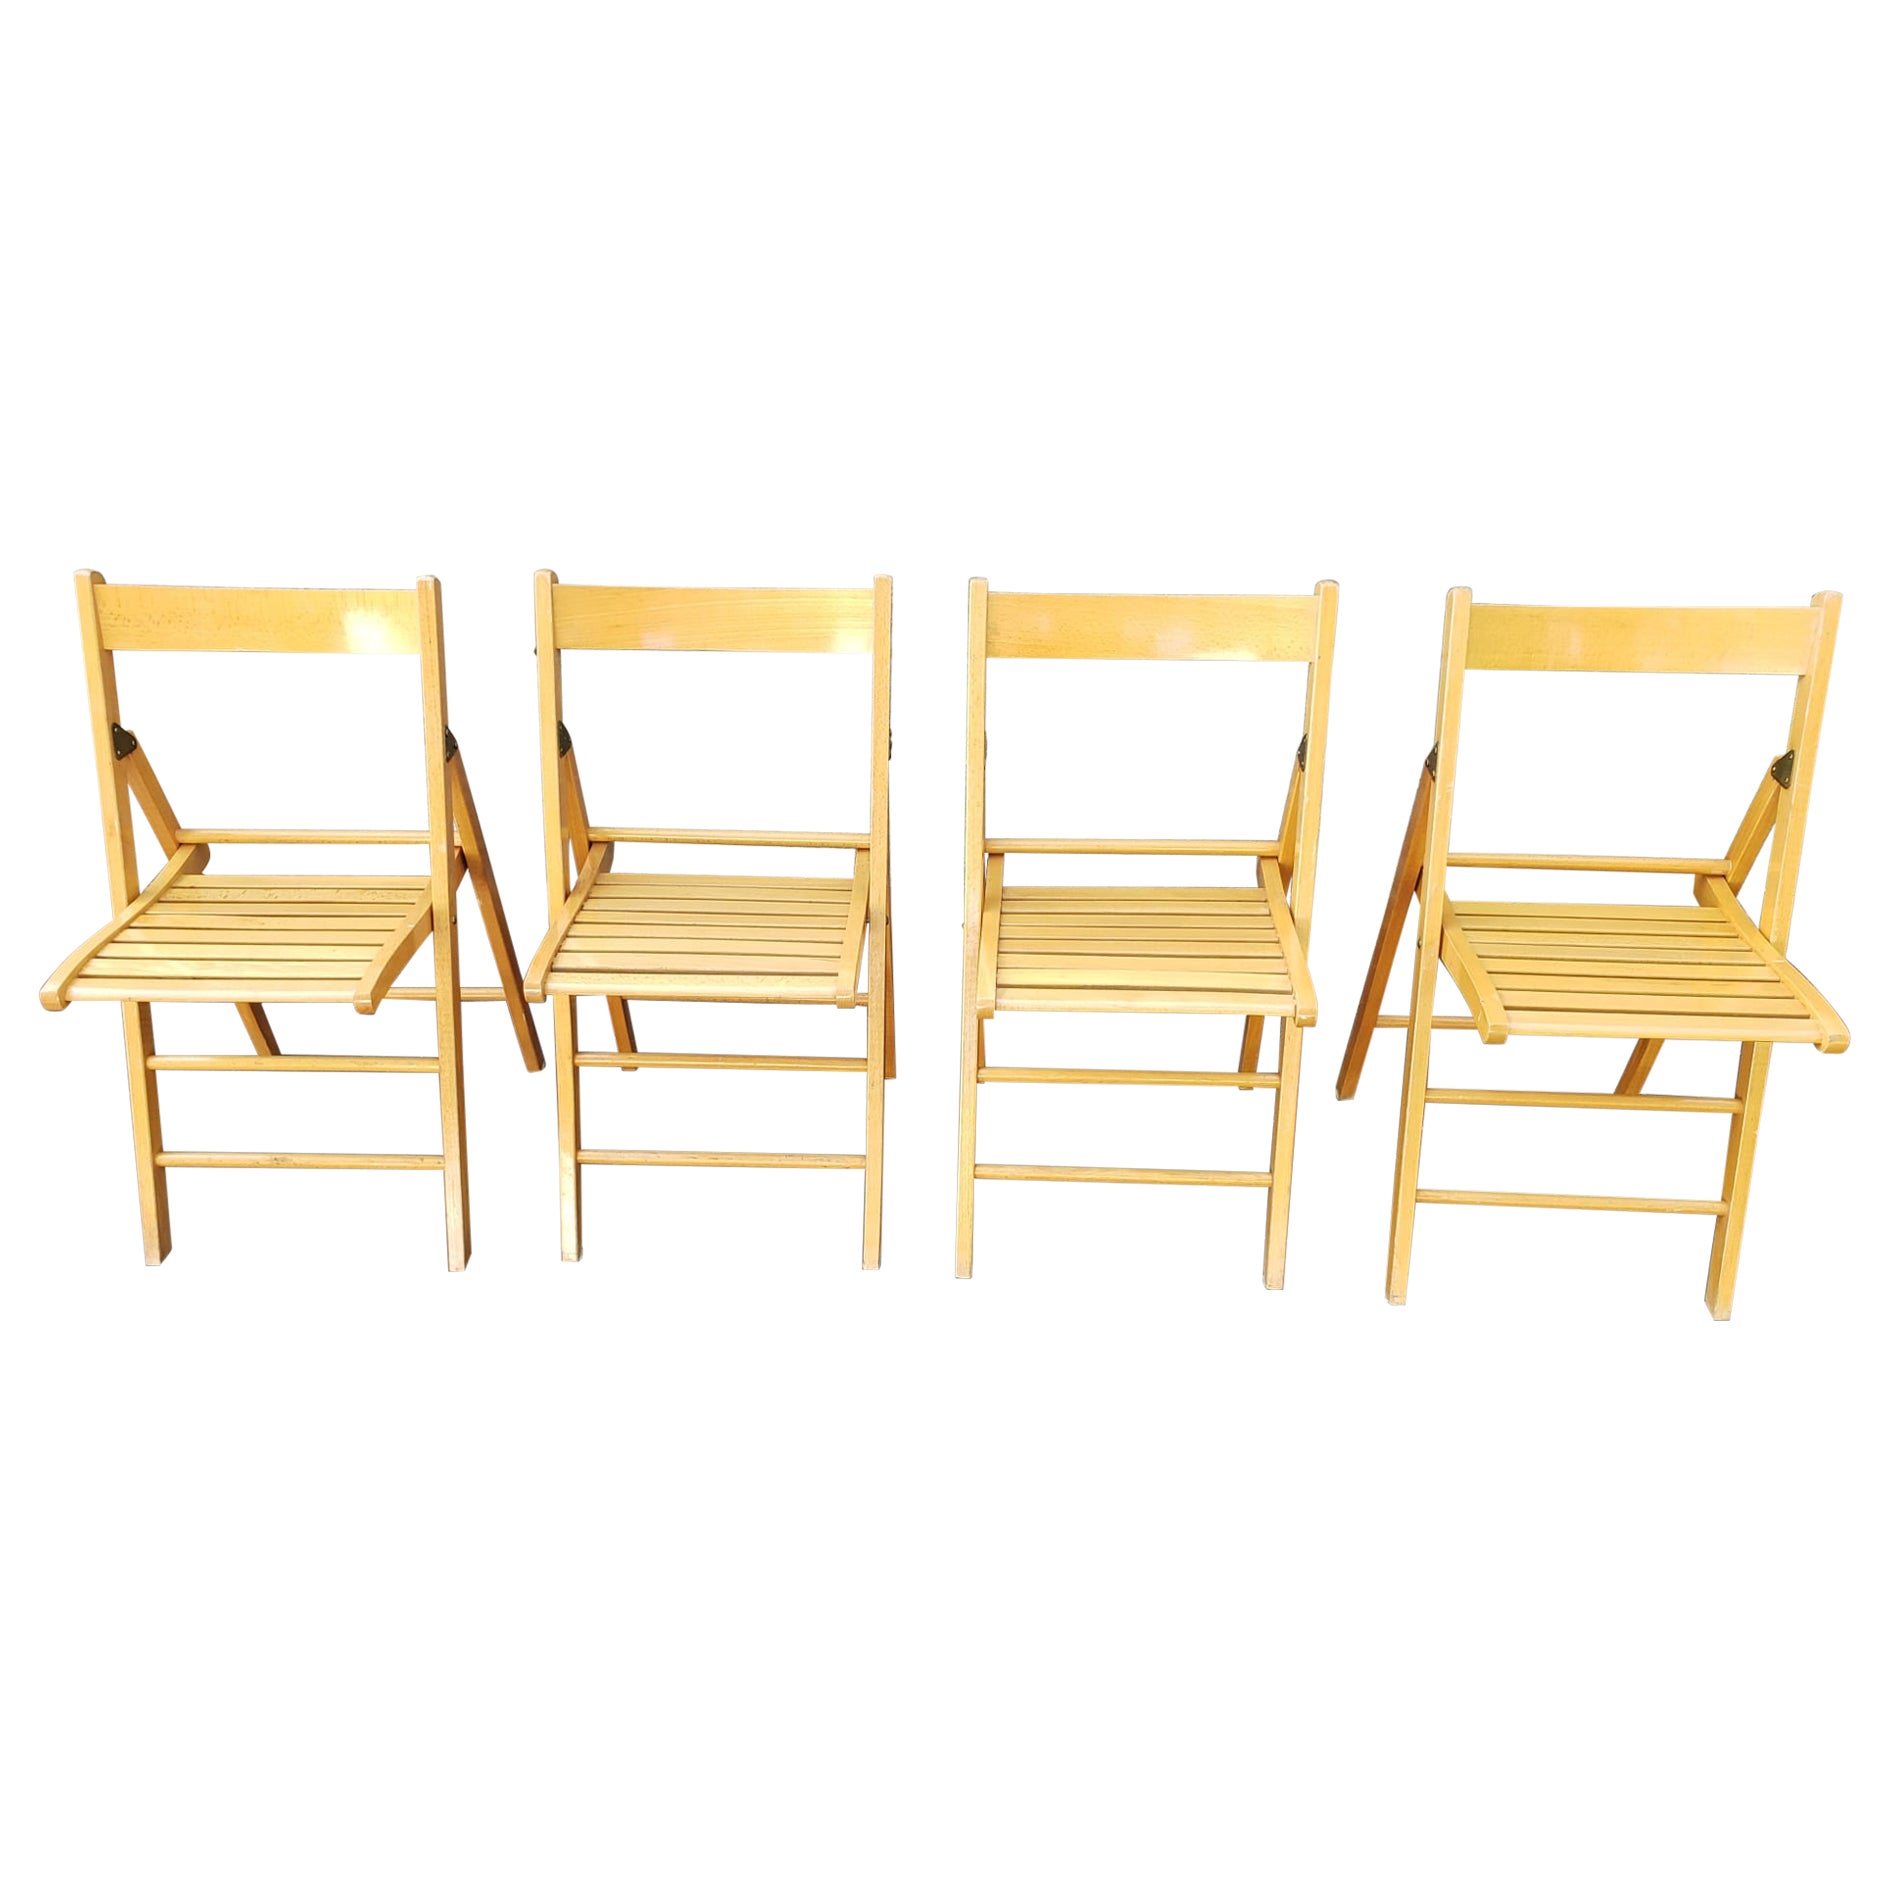 Late 20th Century Set of Four Italian Maple Folding Chairs For Sale